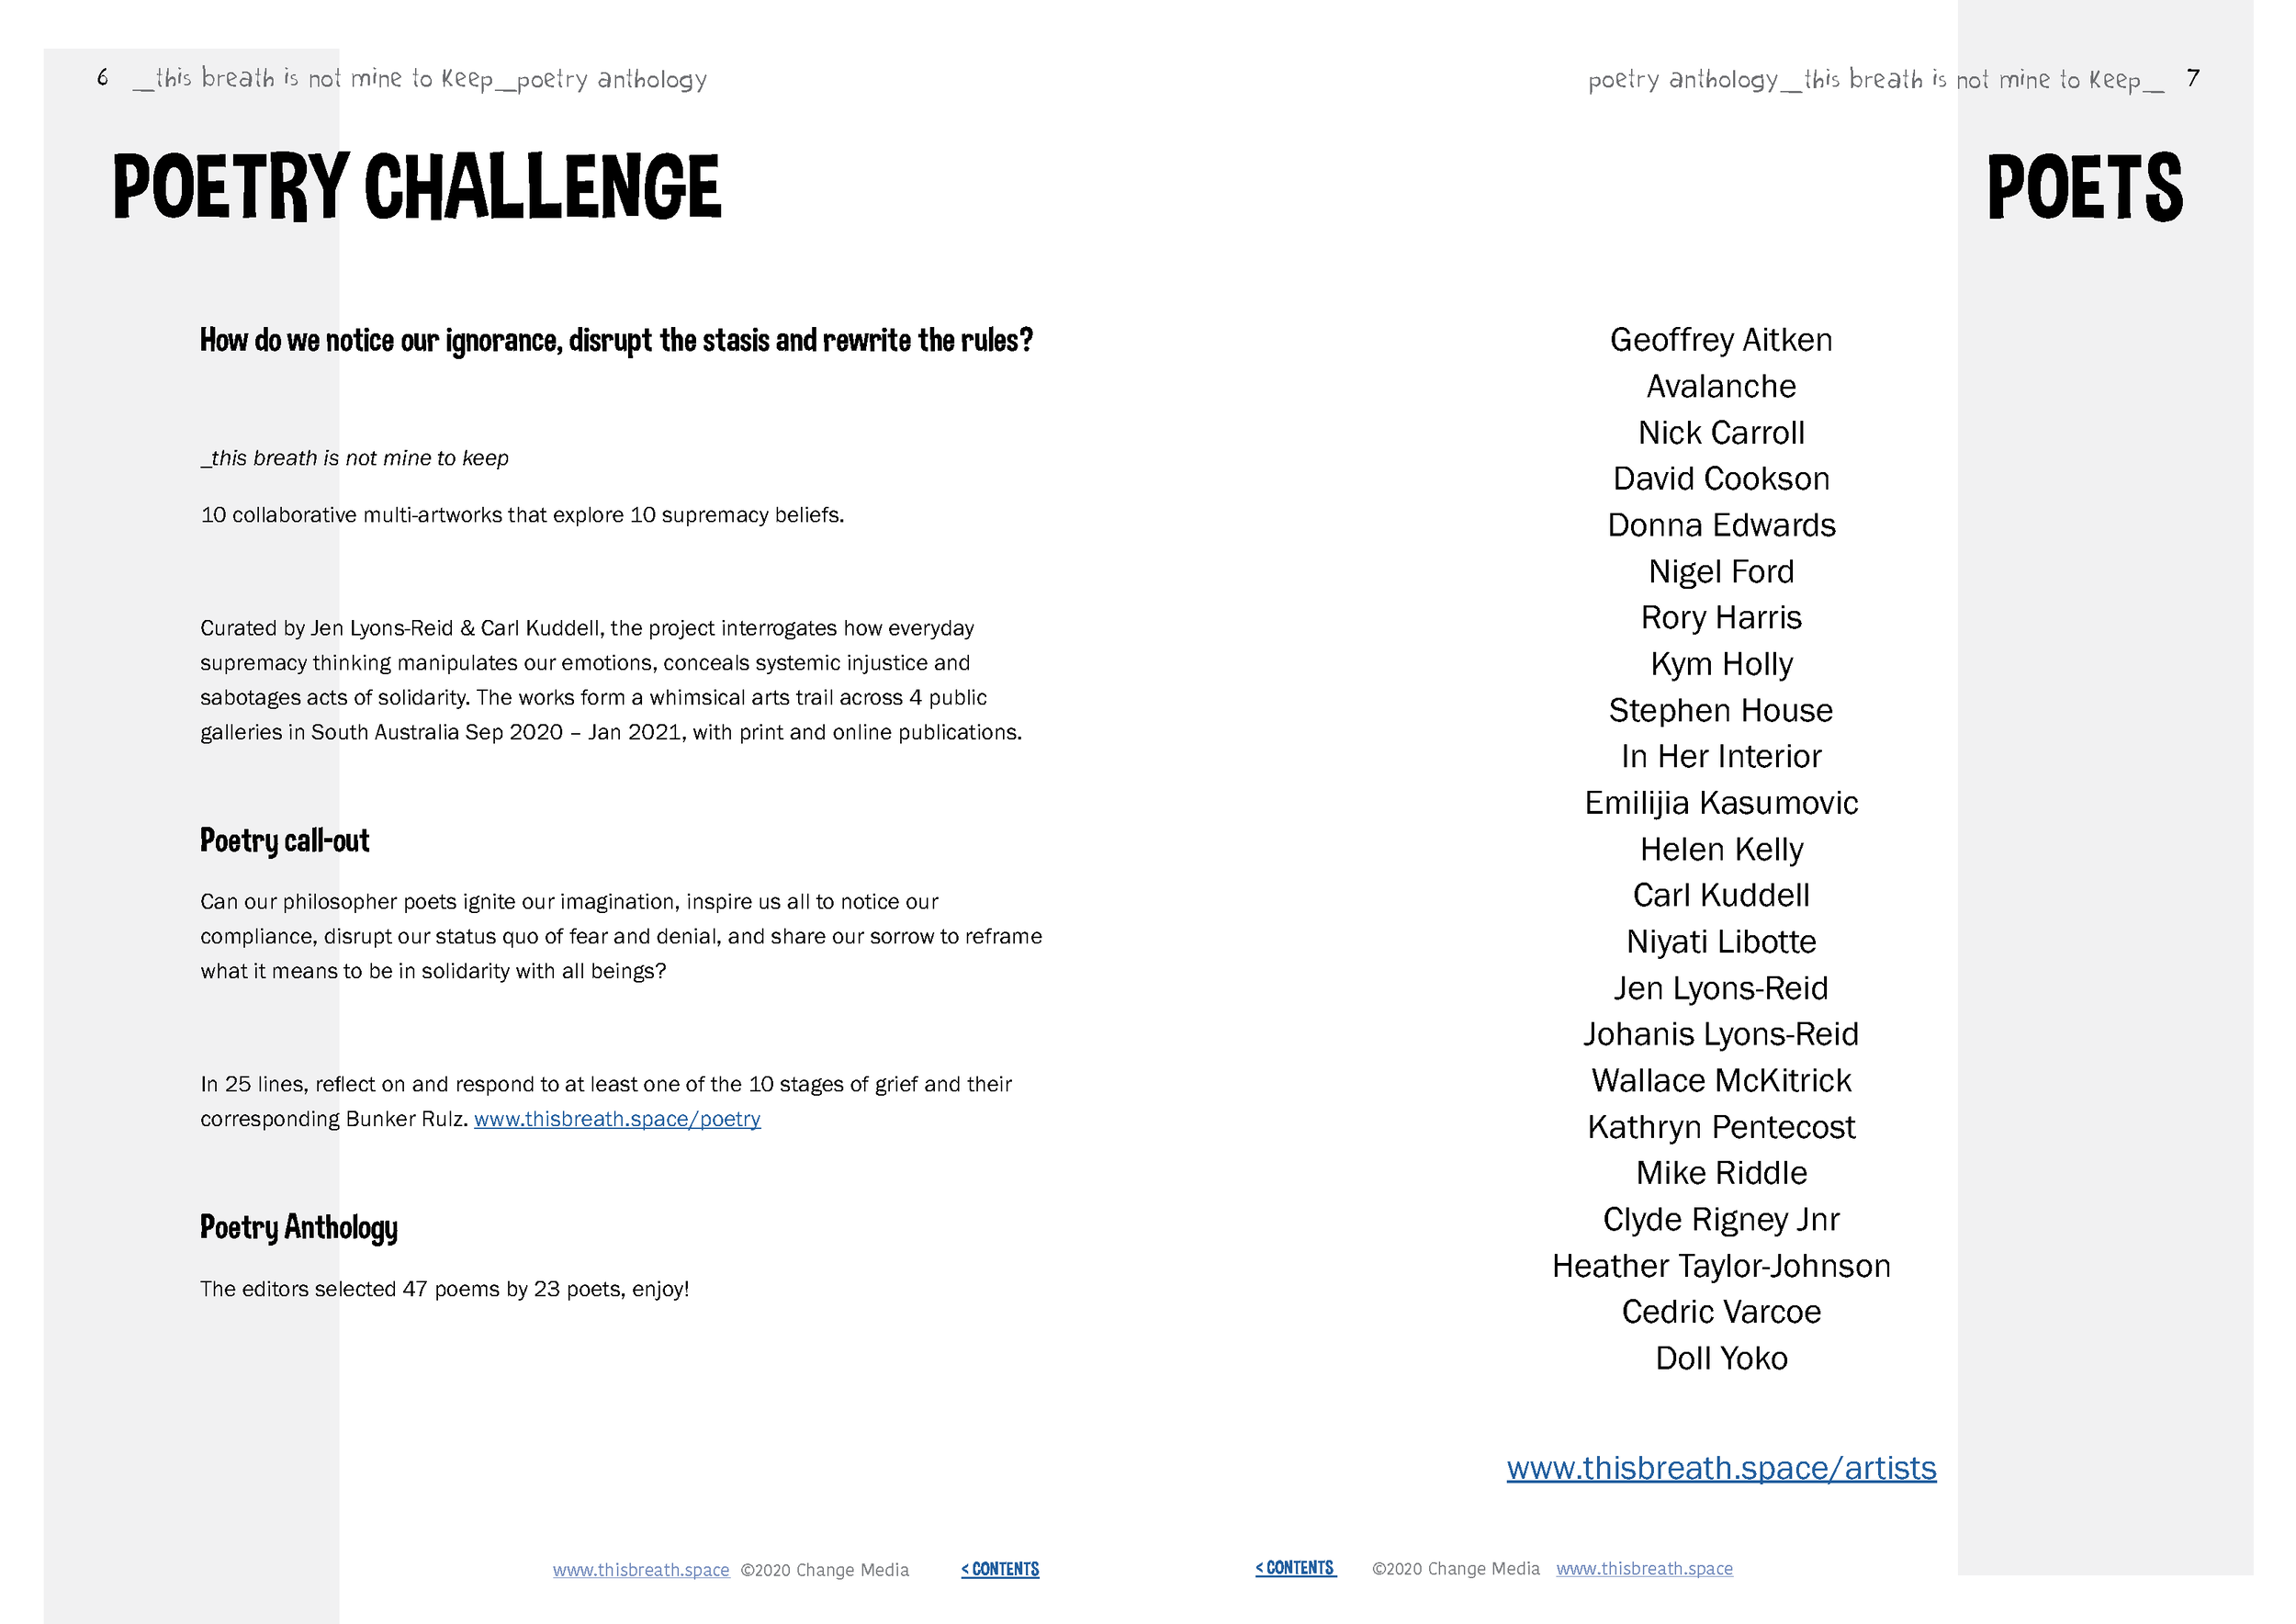 this breath poetry anthology poet challenge